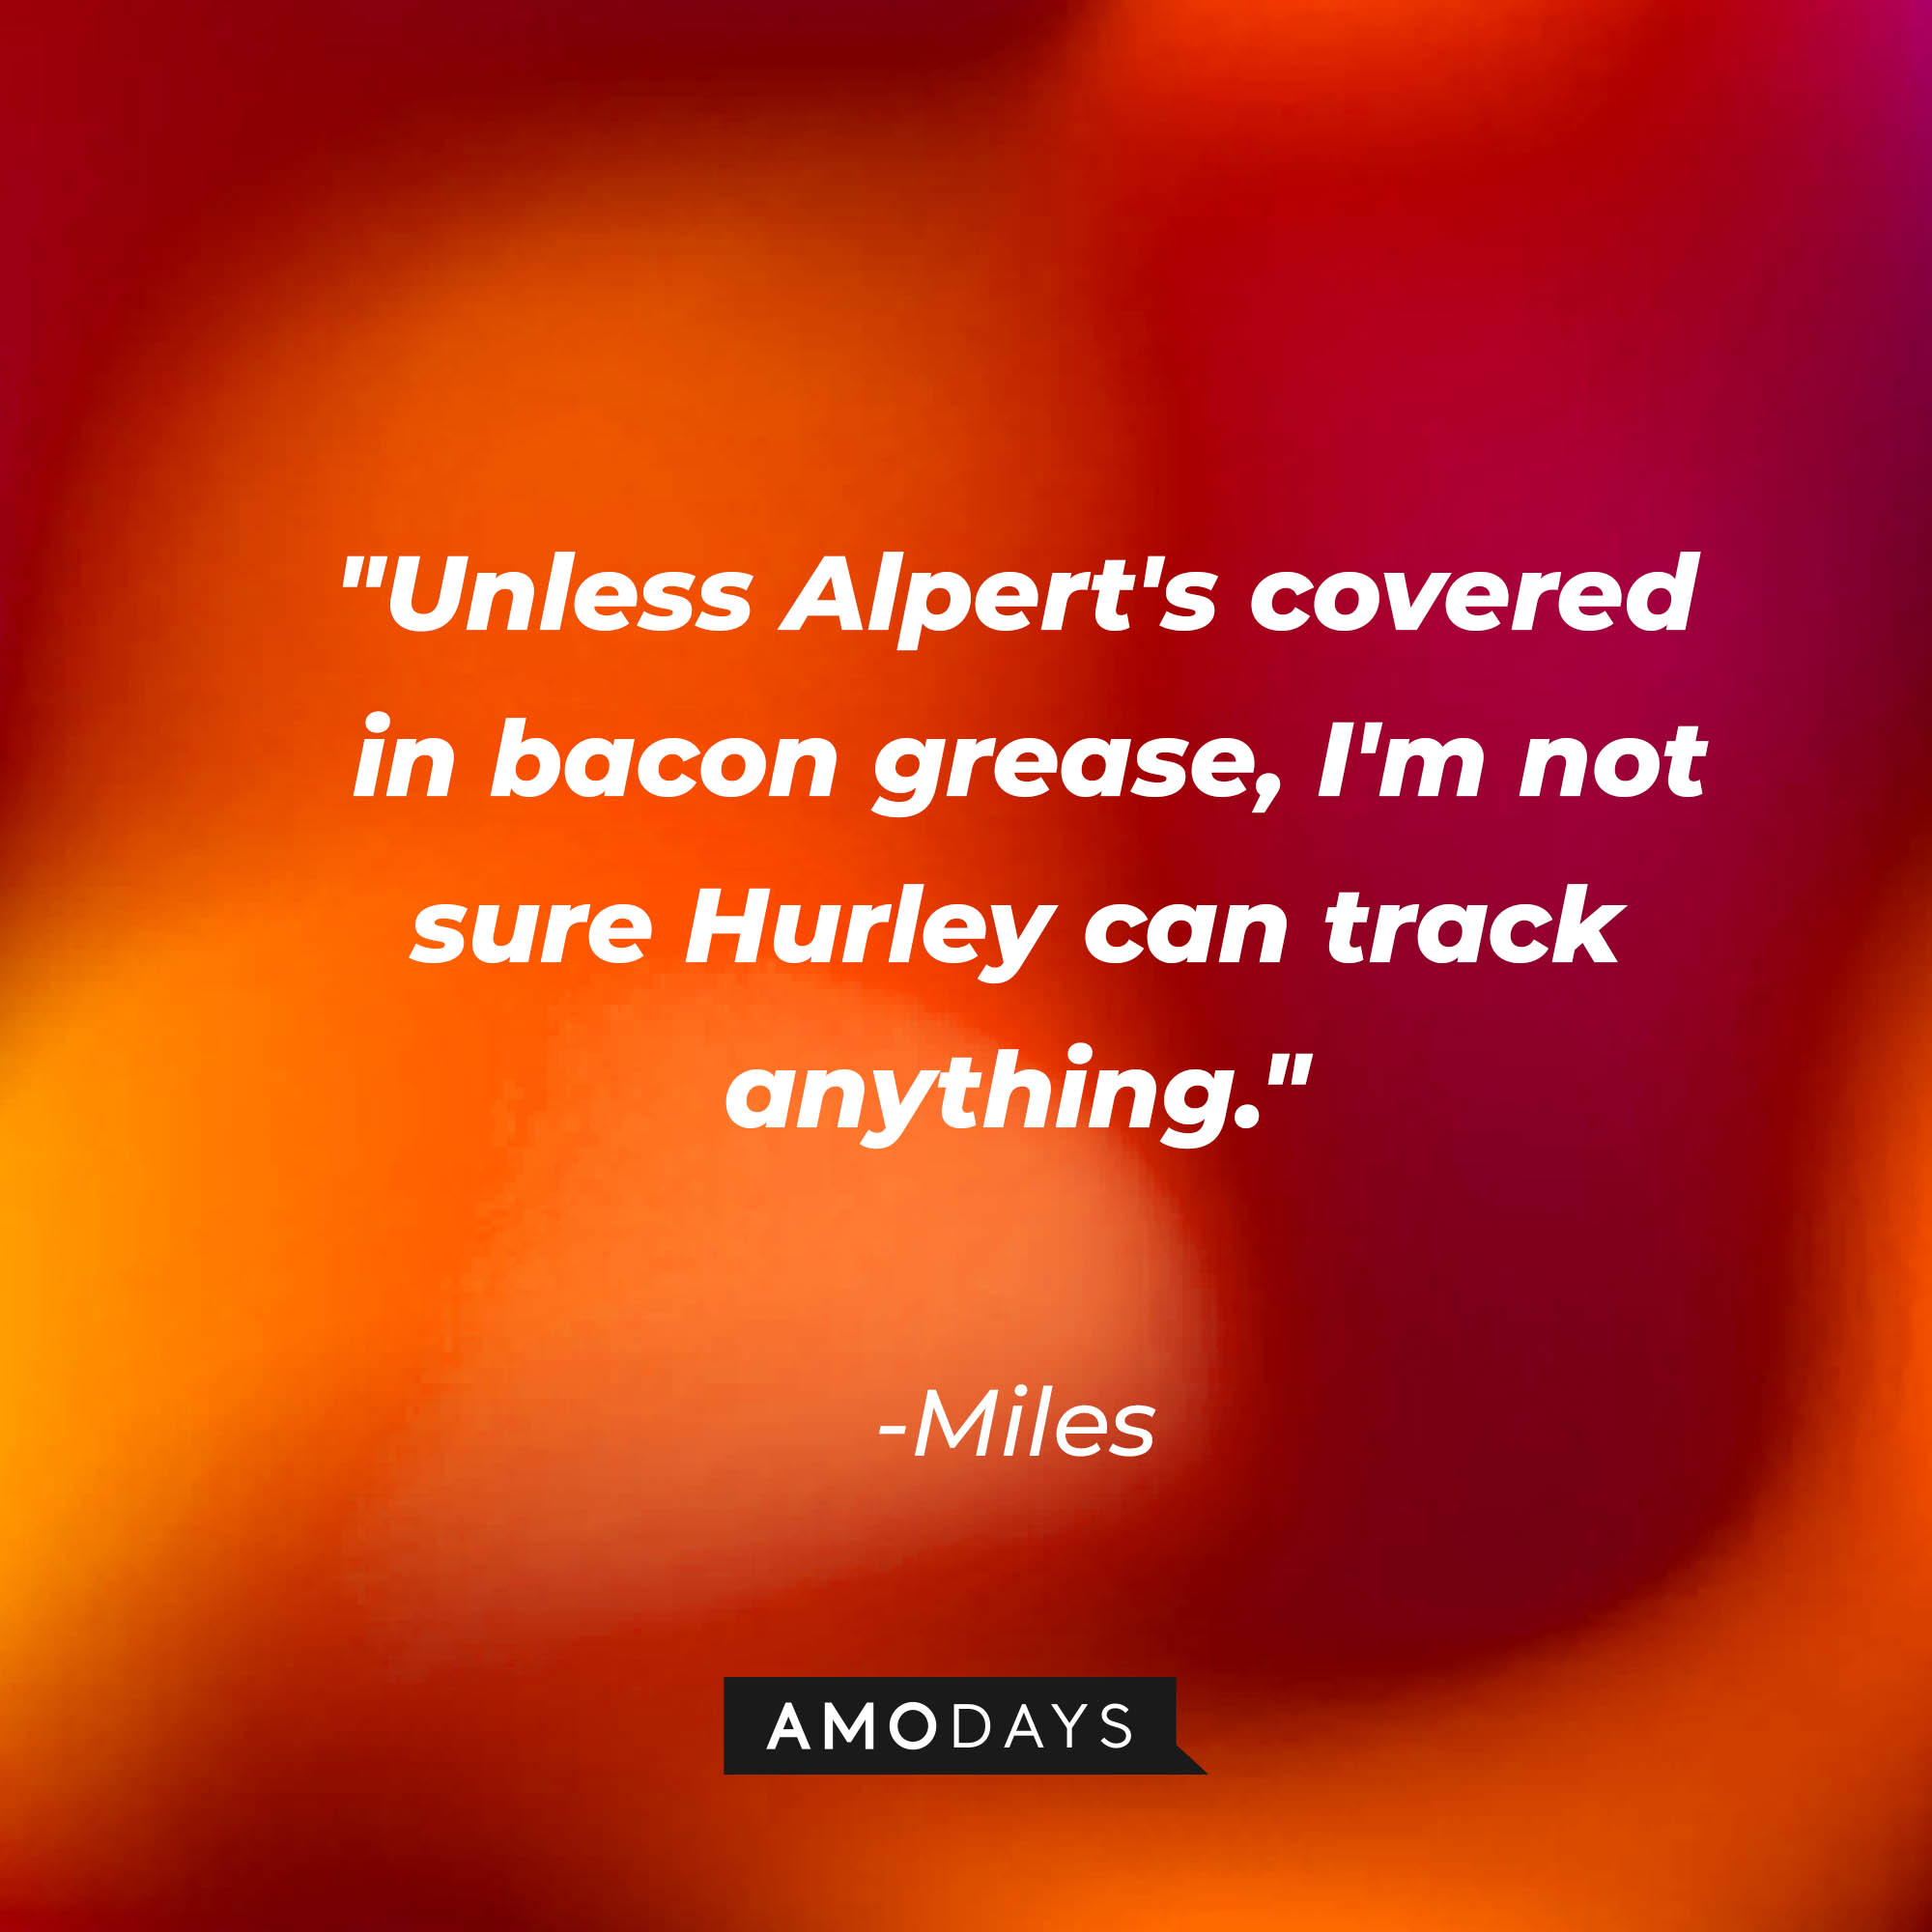 Miles's quote: "Unless Alpert's covered in bacon grease, I'm not sure Hurley can track anything." | Source: AmoDays